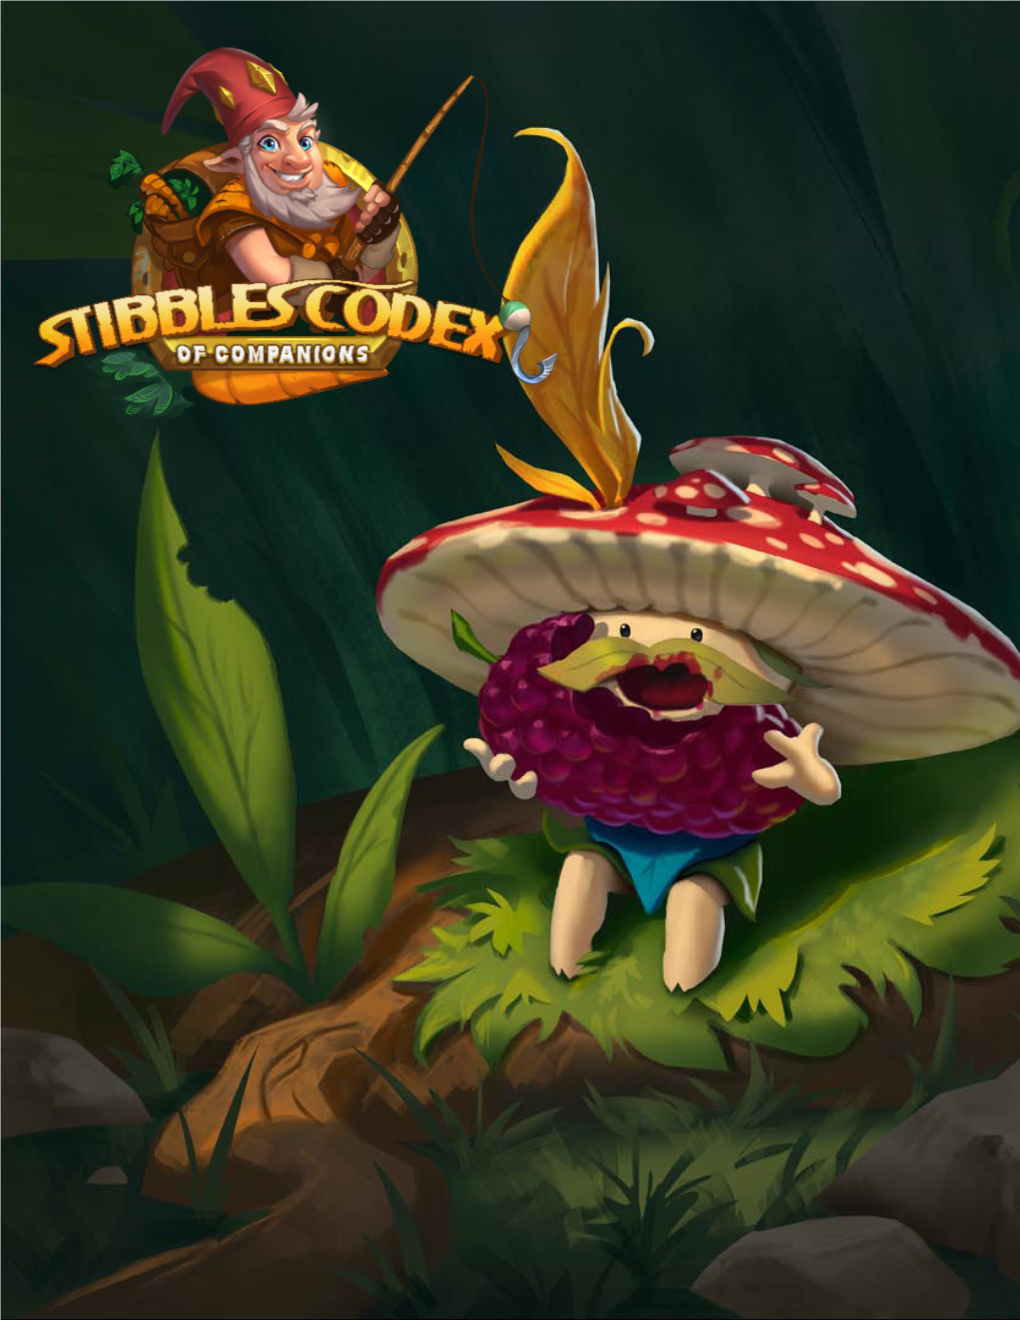 Get Your Own Stibbles' Codex of Companions!